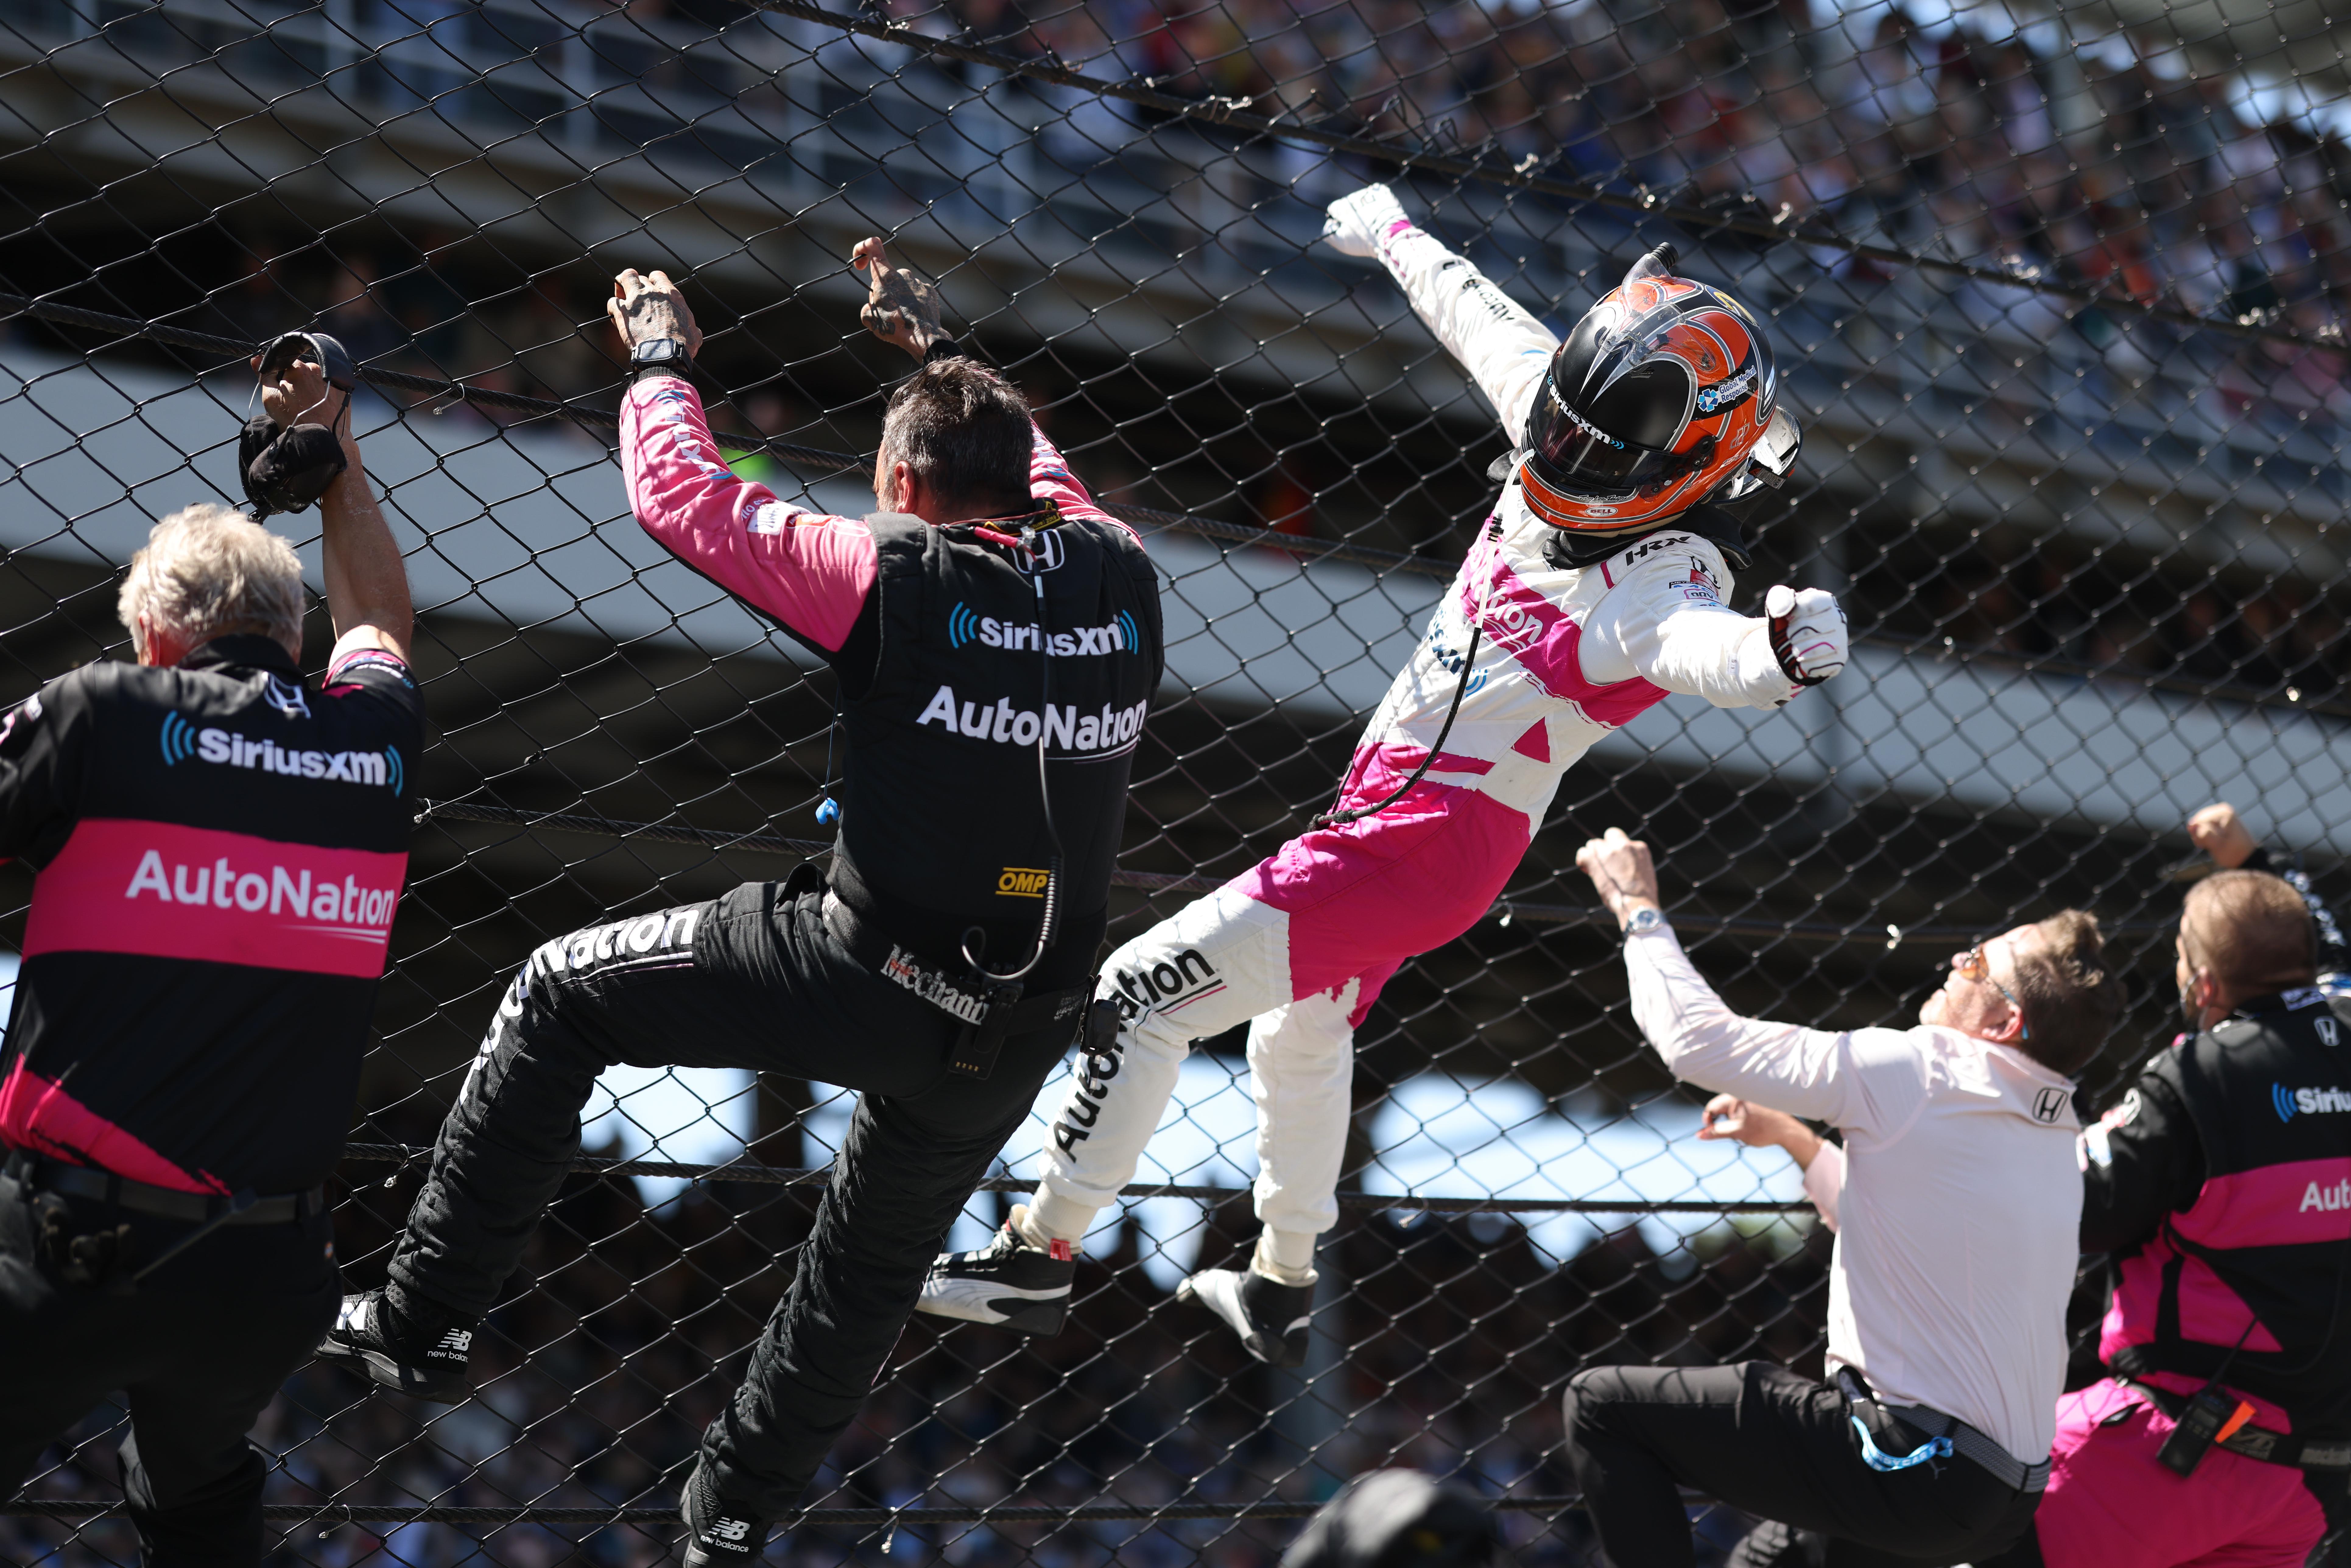 Helio Castroneves Climbs The Front Stretch Fence After Winning The 2021 Indianapolis 500 Largeimagewithoutwatermark M50392